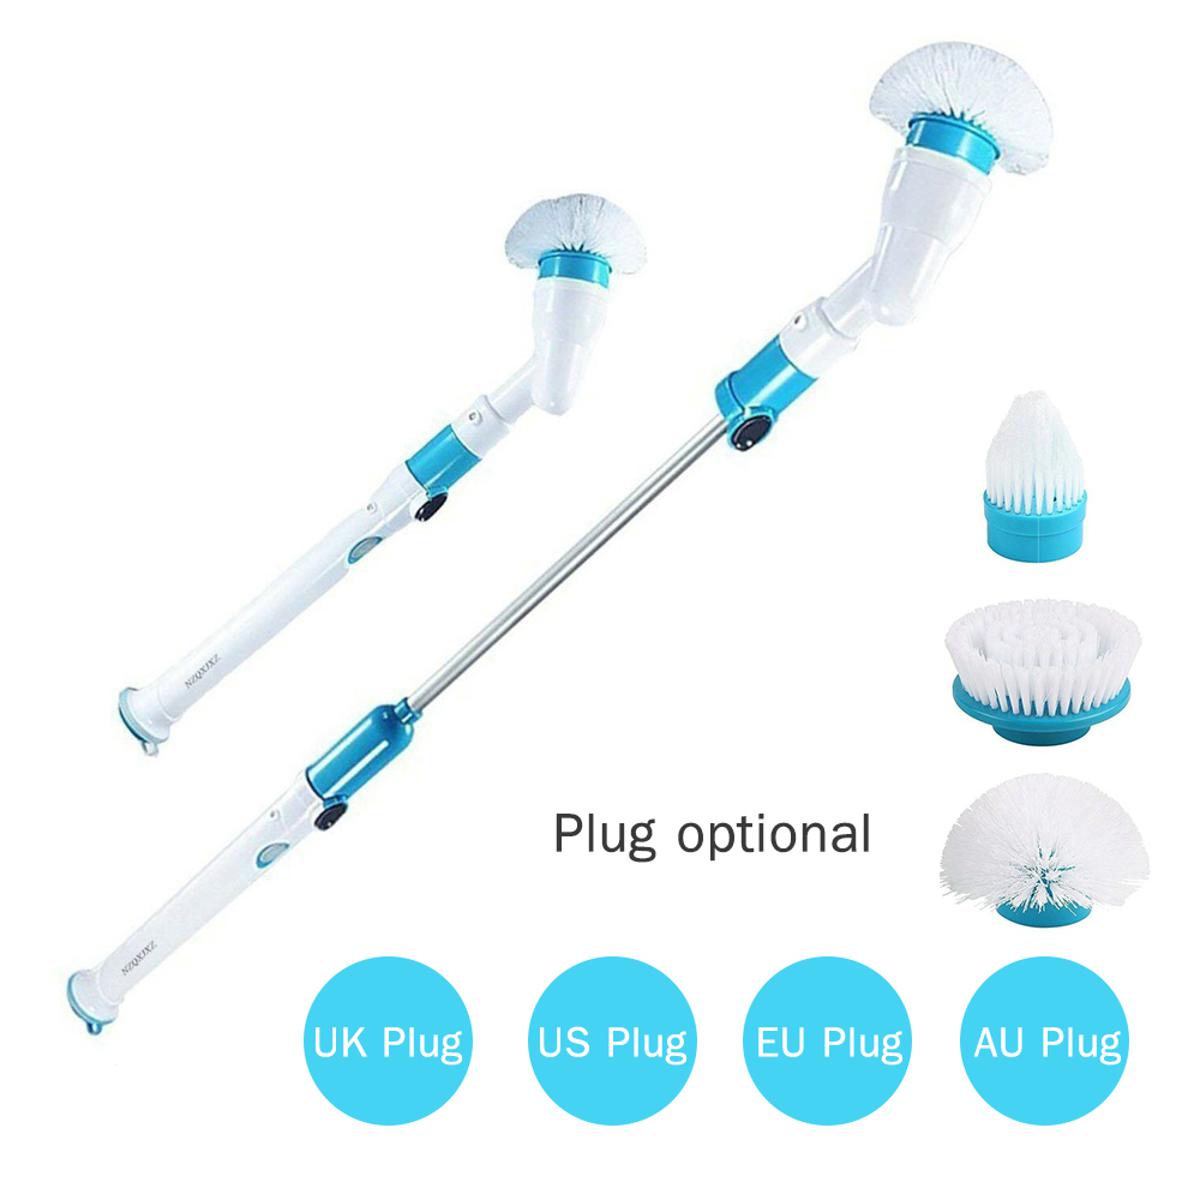 Adjustable Electric Spin Scrubber Turbo Scrub Cleaning Brush Cordless Chargeable for Tub,Tile, Floor, Wall,Shower, Bathtub, and Kitchen, Size: 112